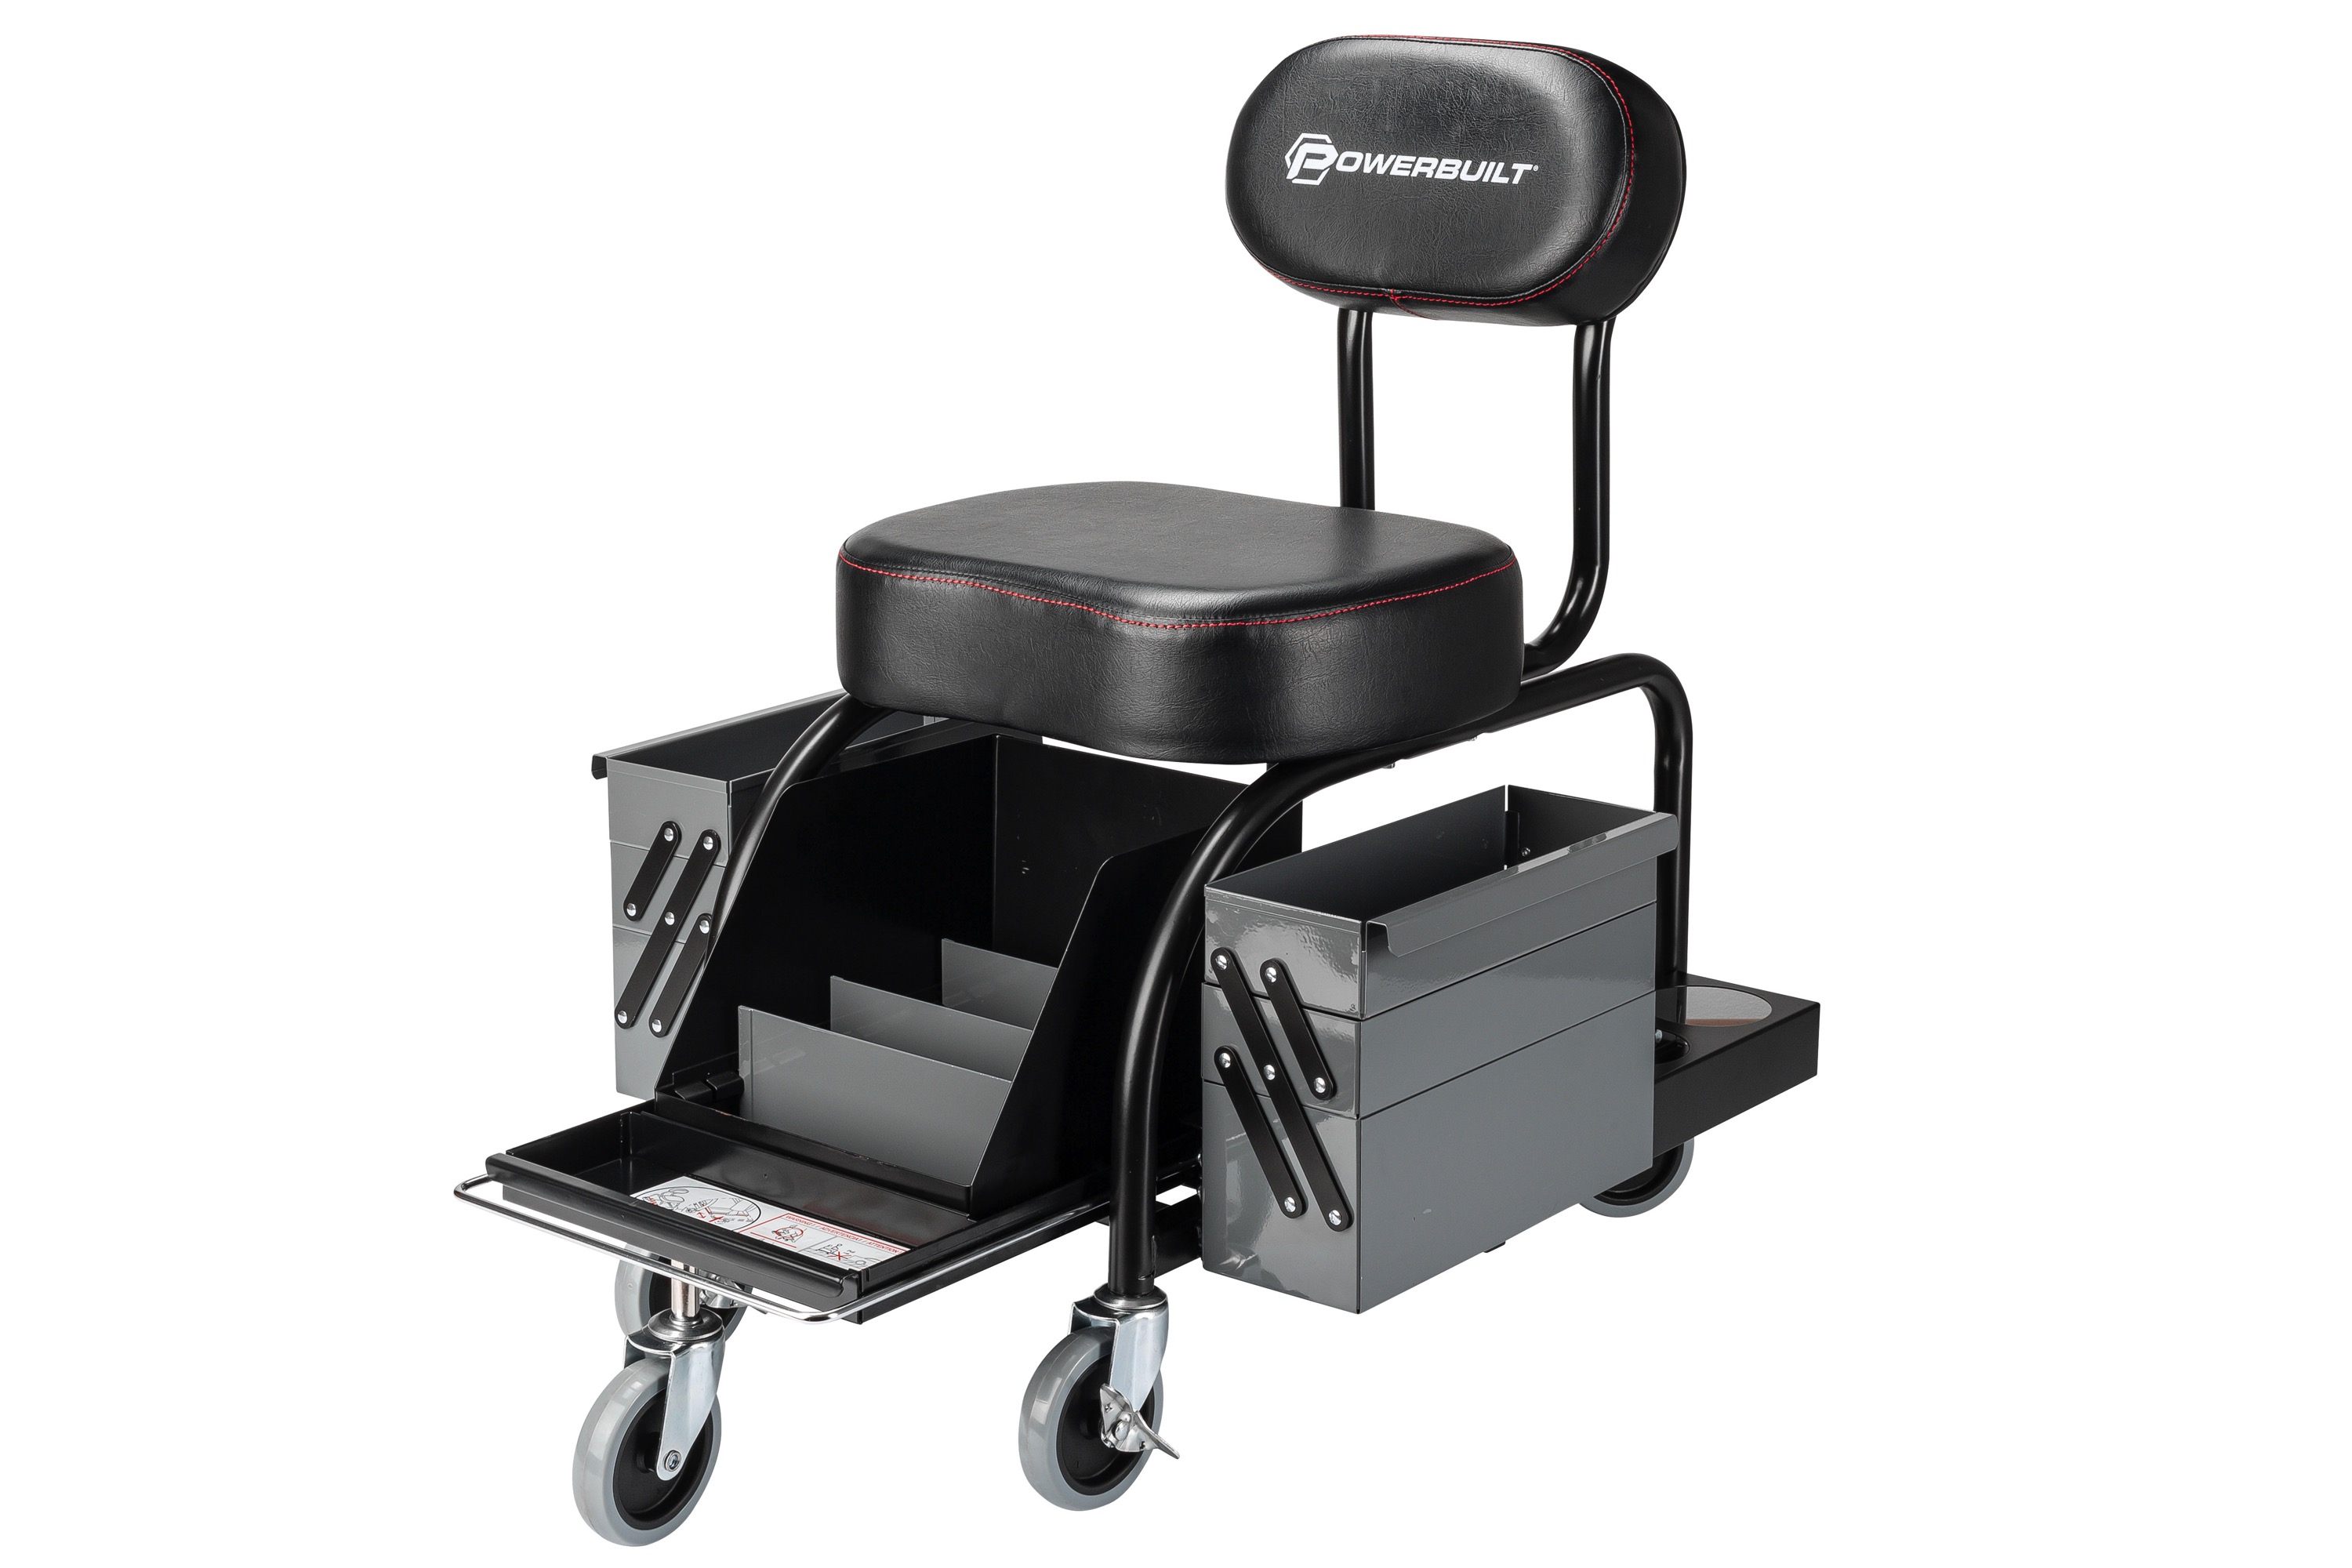 Powerbuilt Professional Shop Seat With Expandable Side Trays - 941929ECE - image 2 of 3